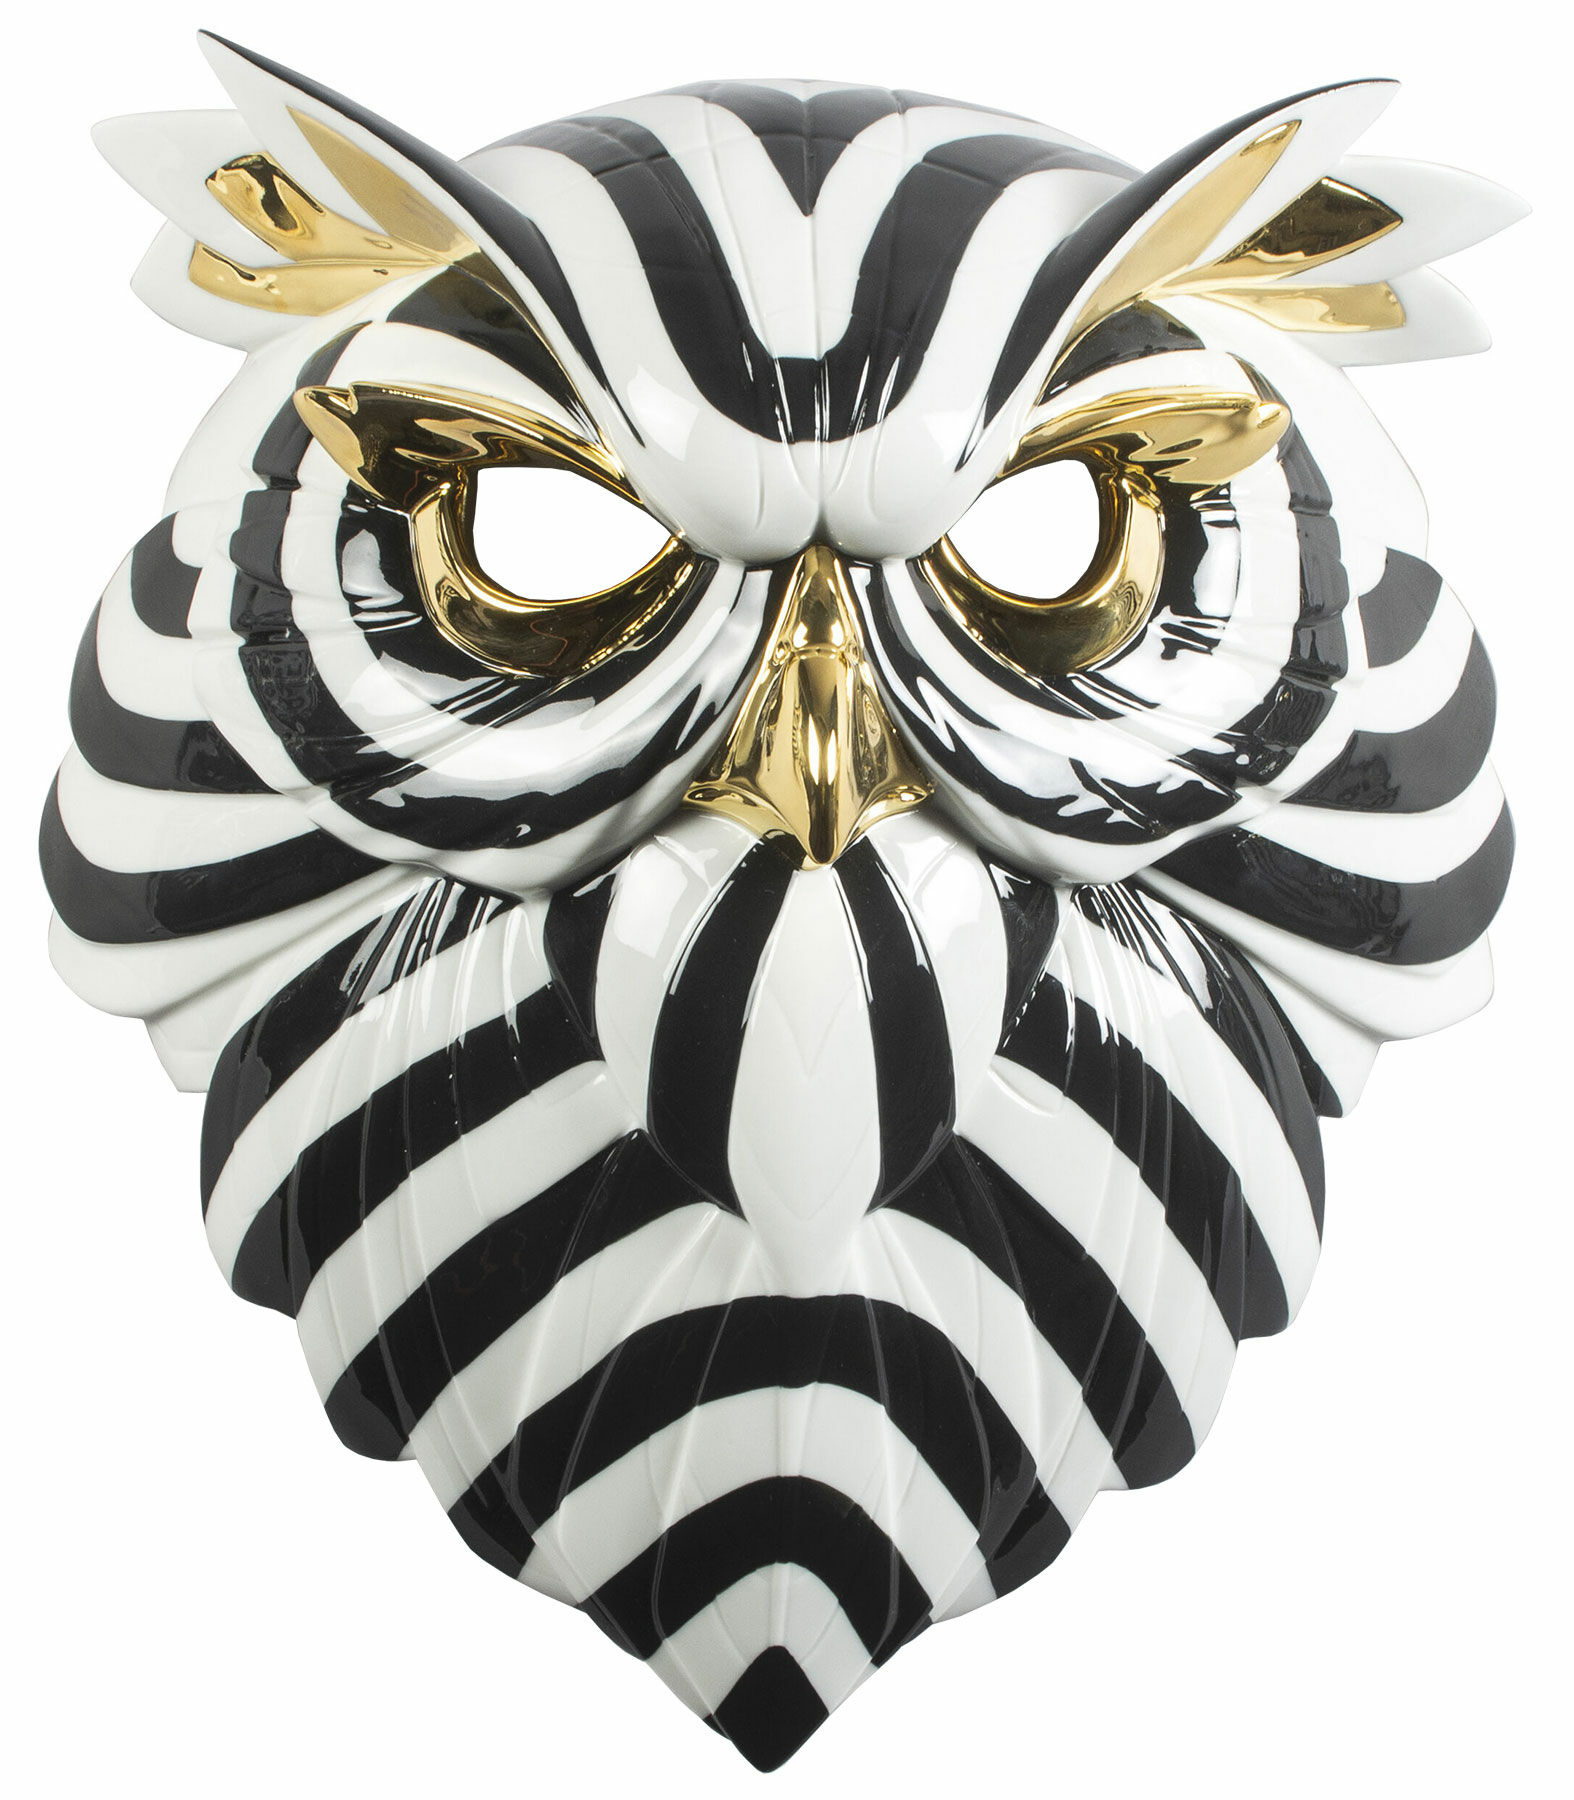 Wall object "Owl Mask Black and Gold", porcelain by Lladró